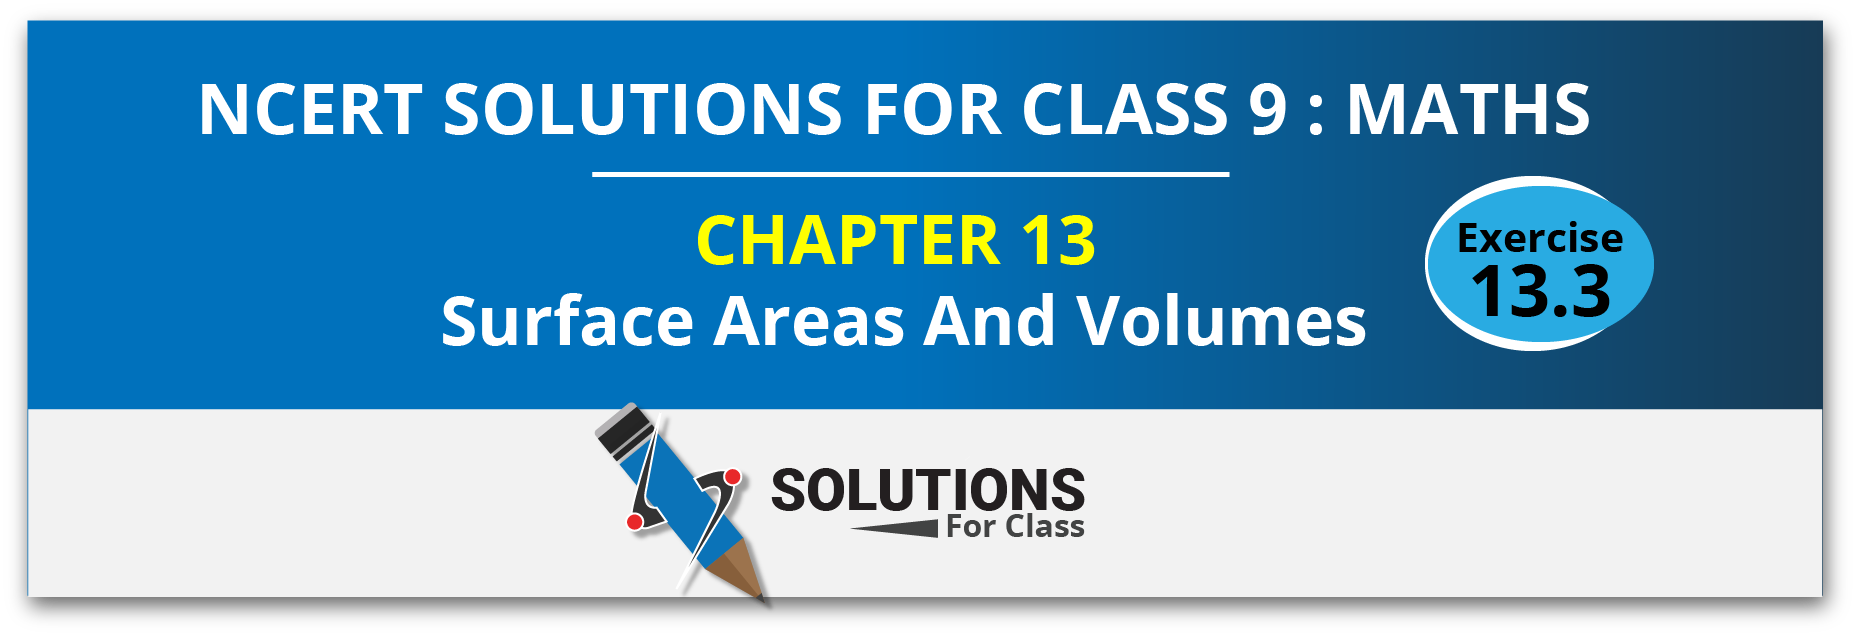 NCERT Solutions for Class 9 Maths Chapter 13 Surface Areas and Volumes Ex 13.3